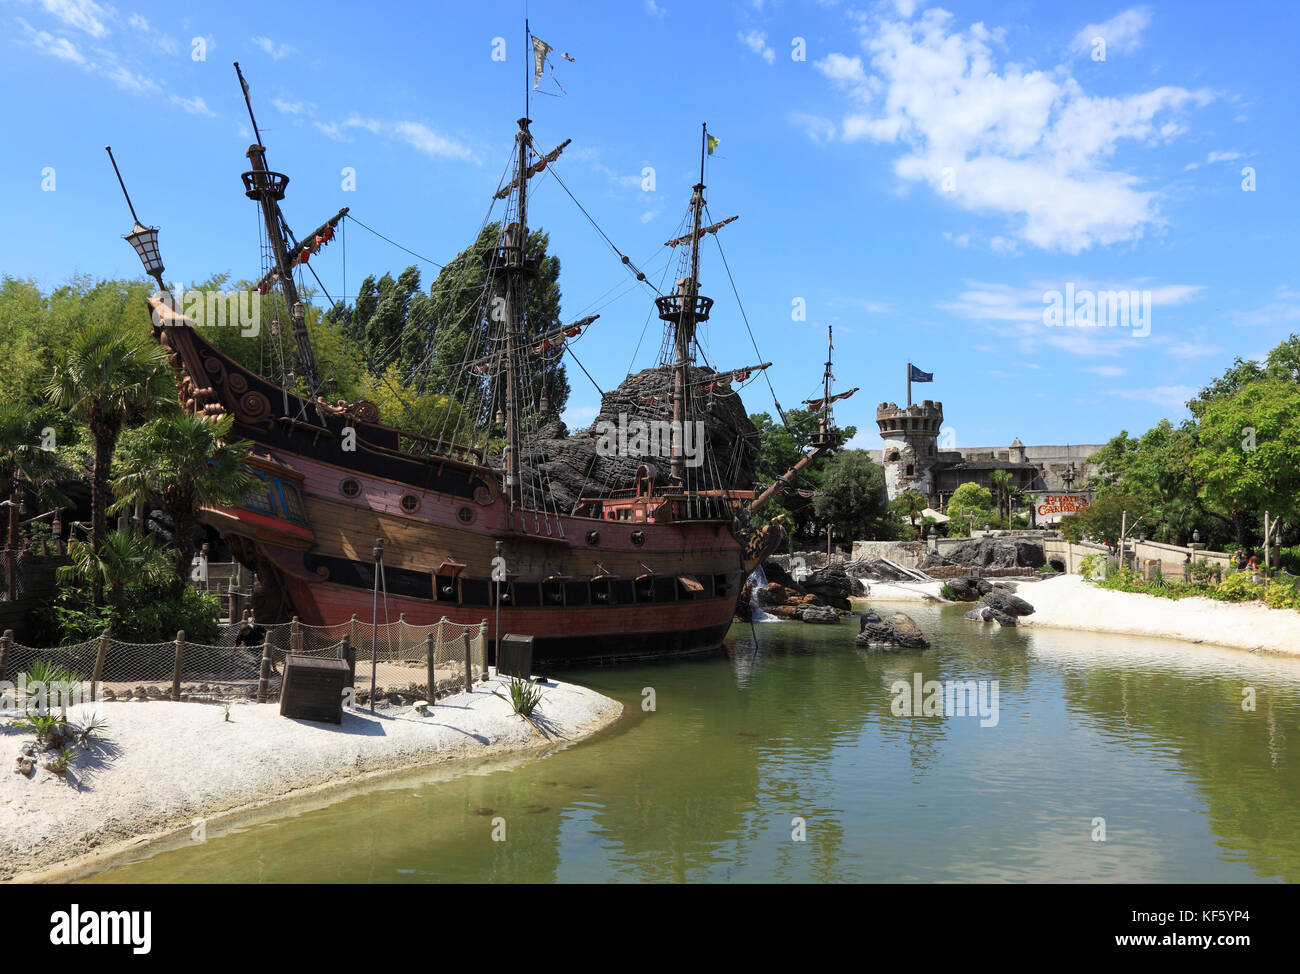 Paris,France,July 11th 2010: Image of the ship of pirates located near the beach of pirates in Adventureland in Disneyland Paris.In the distance you c Stock Photo